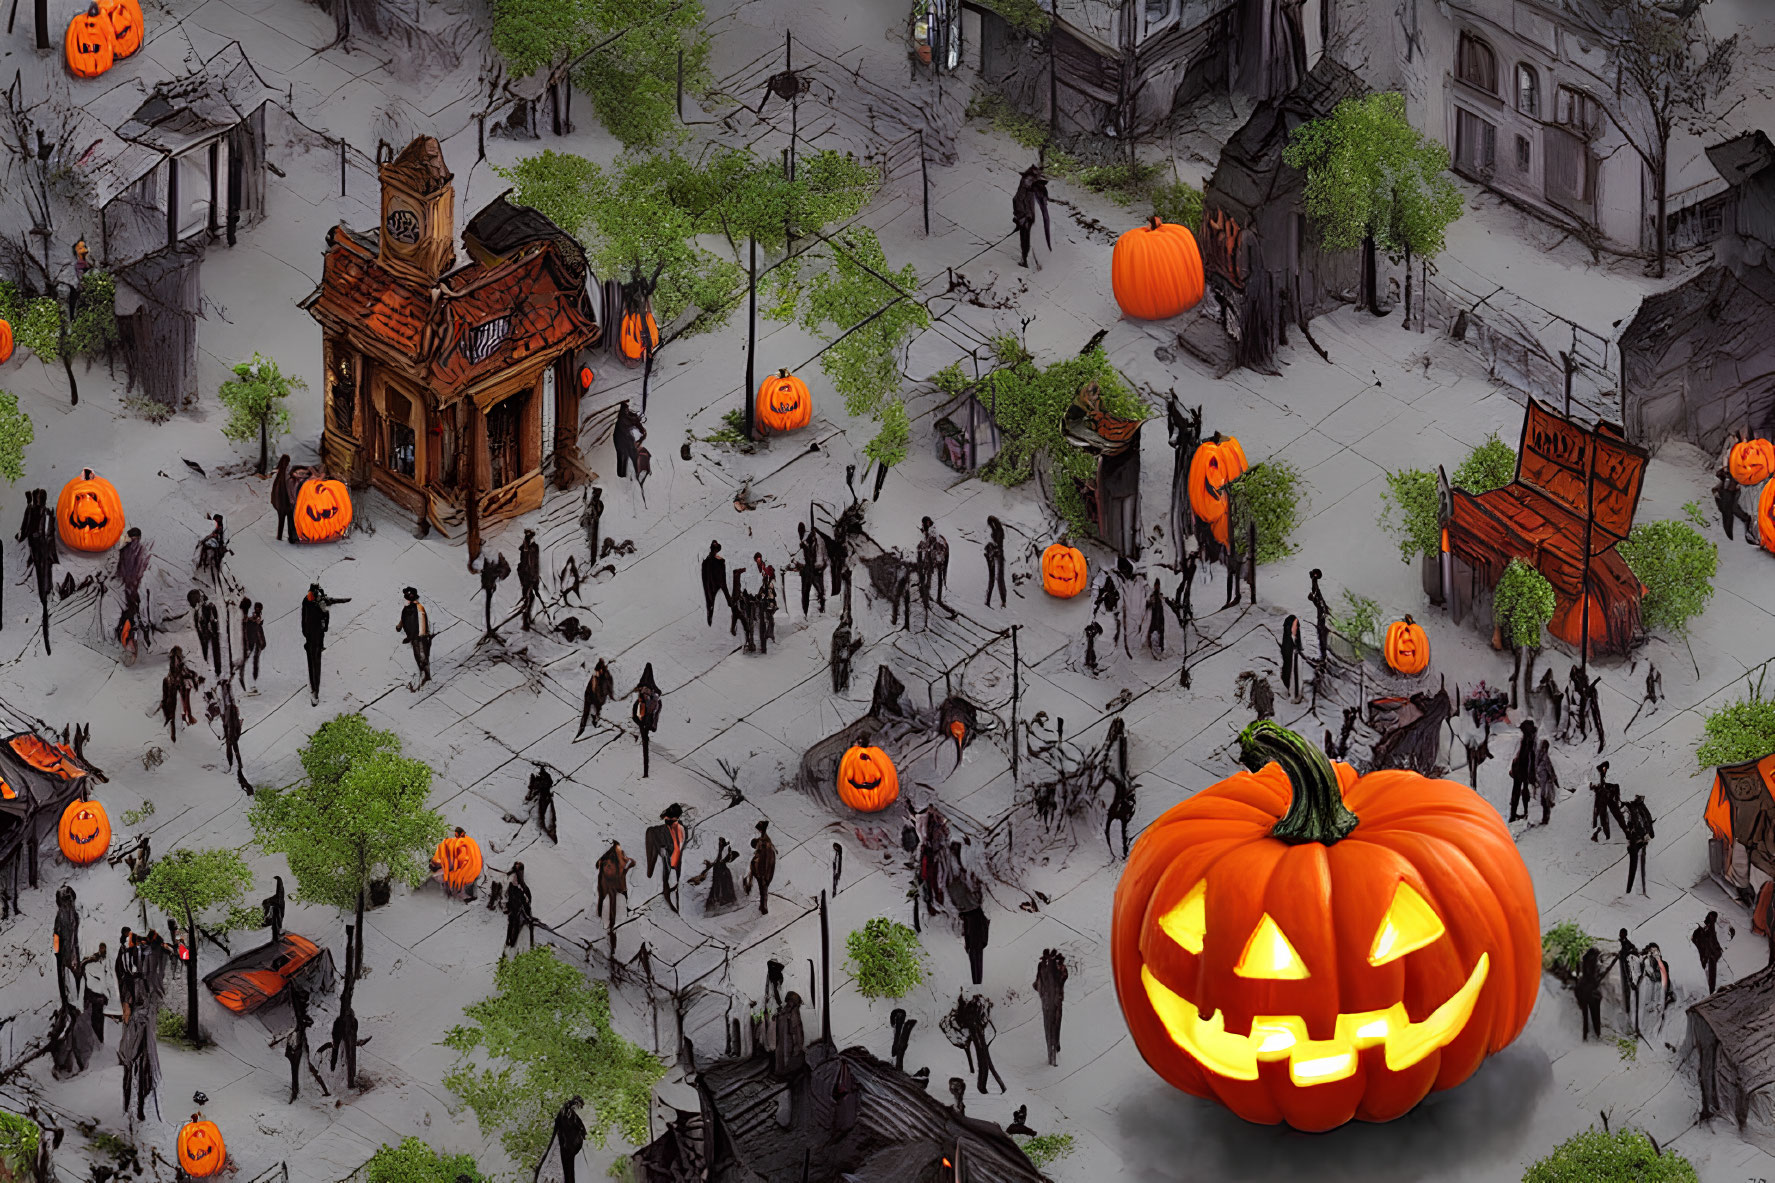 Illustration of Halloween-themed town square with jack-o'-lanterns and costumed characters